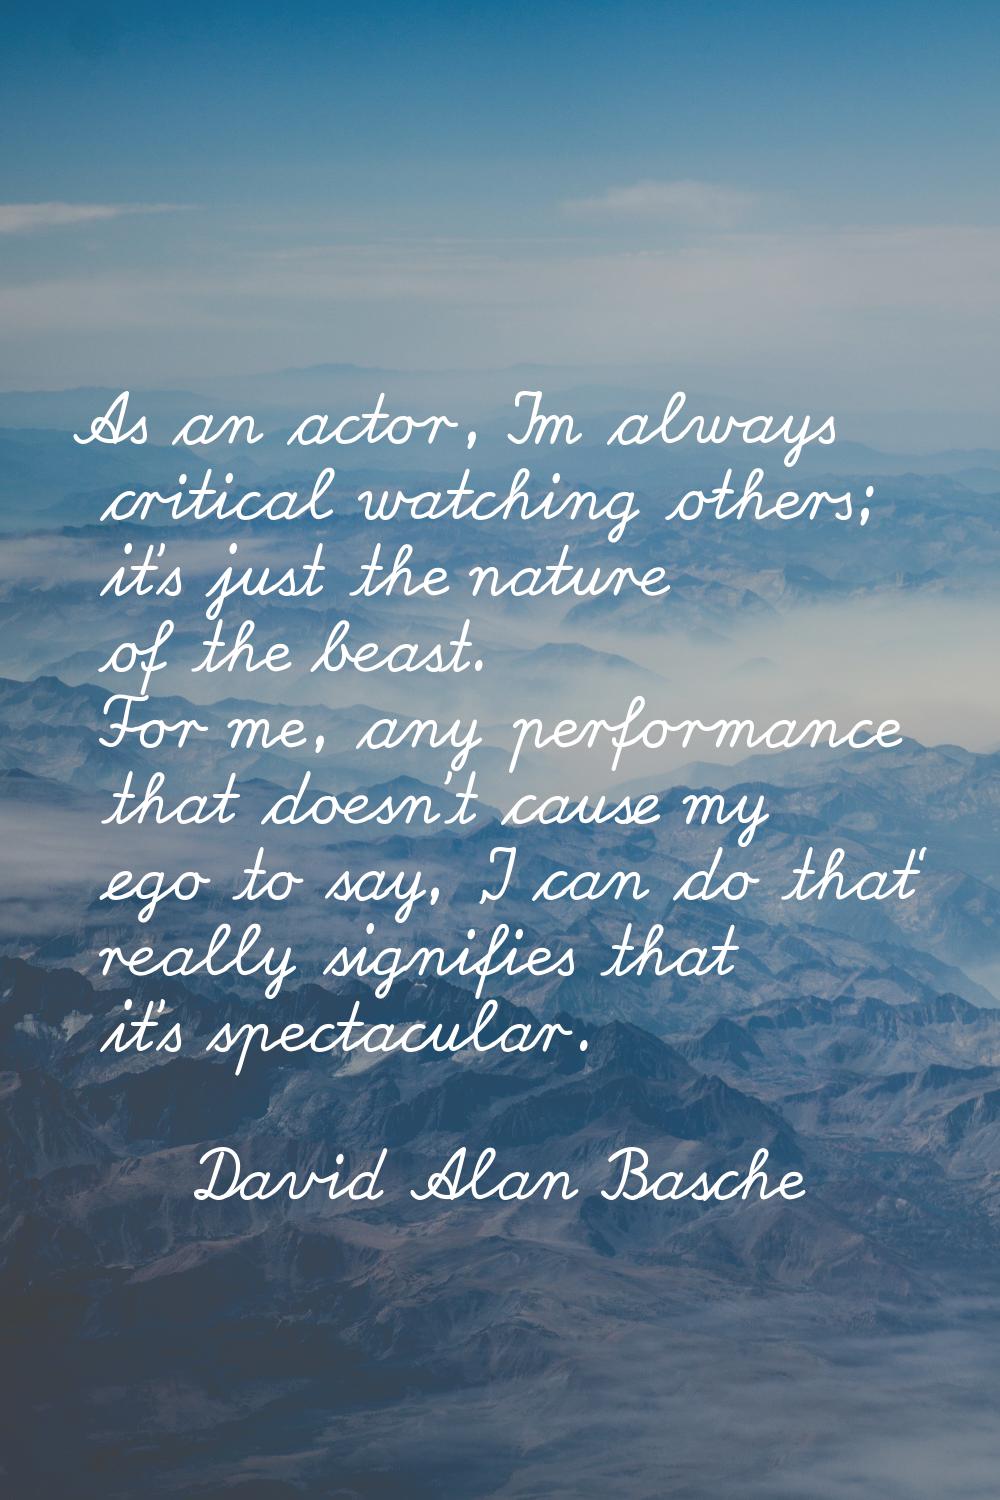 As an actor, I'm always critical watching others; it's just the nature of the beast. For me, any pe